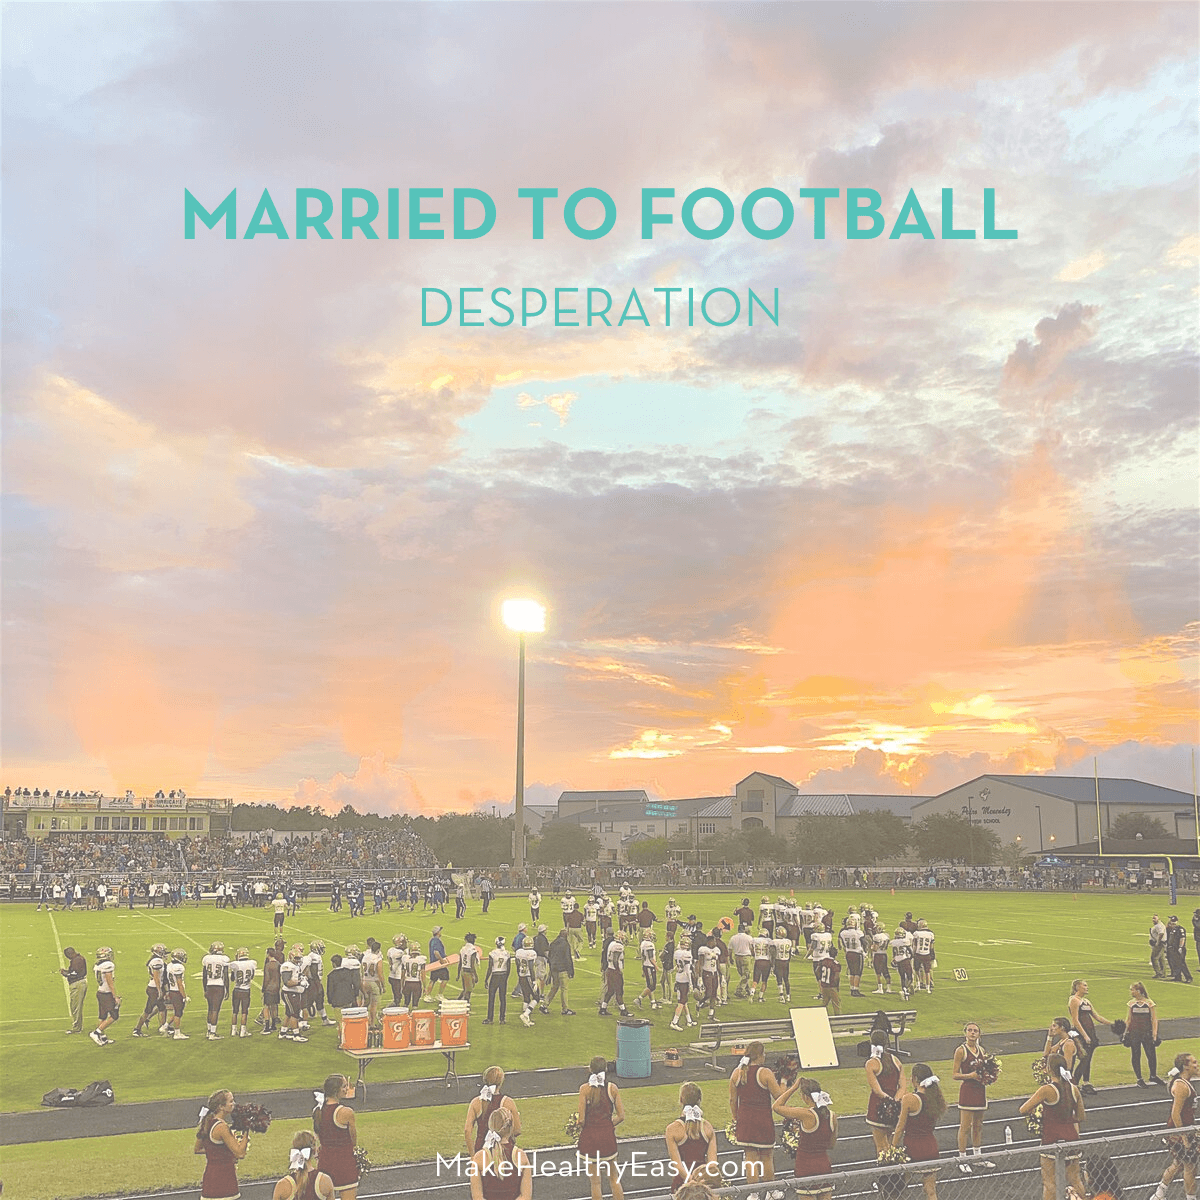 Married to Football: How desperation creeps in and what to do about it